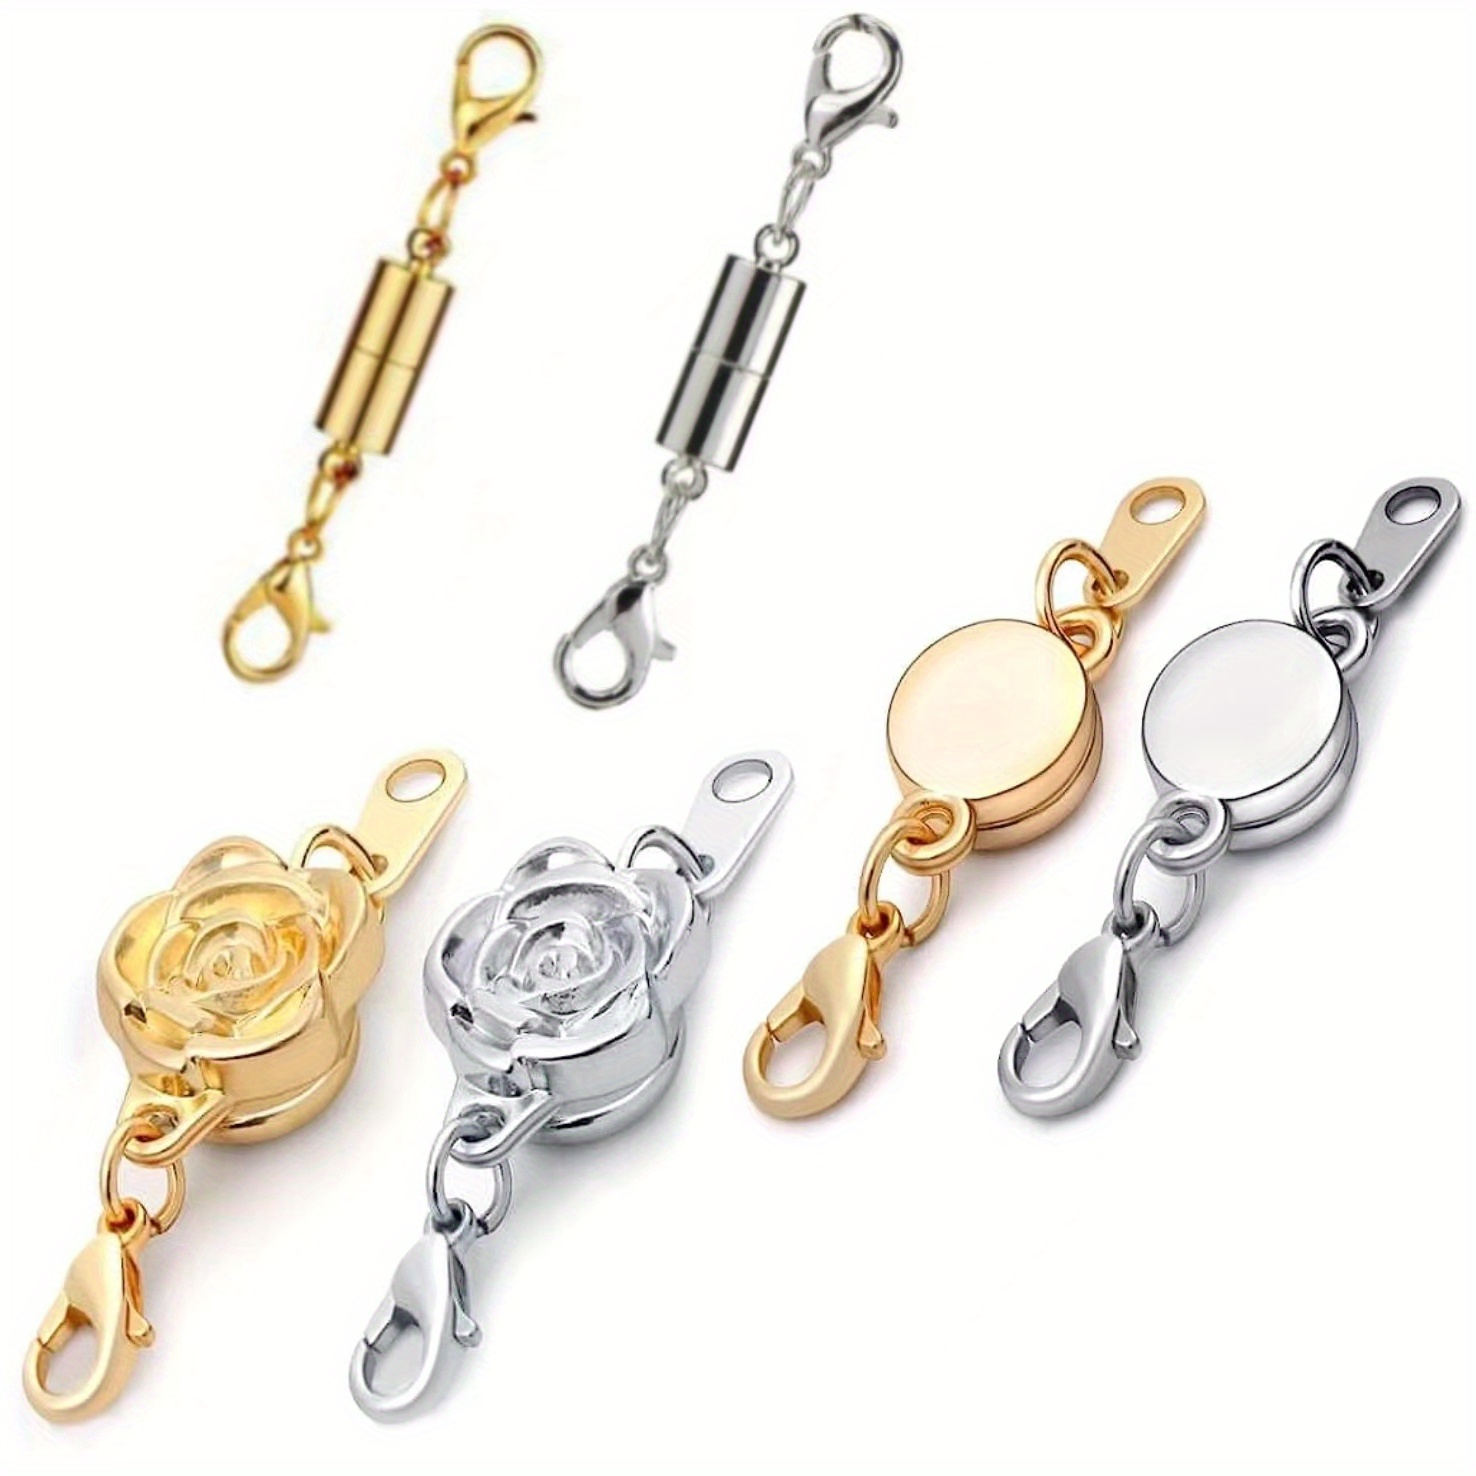 18 Pcs 3 Styles Magnetic Necklace Clasps and Closures, Rose Round  Cylindrical Jewelry Magnetic Clasp Connector Locking Magnetic Clasp  Bracelet